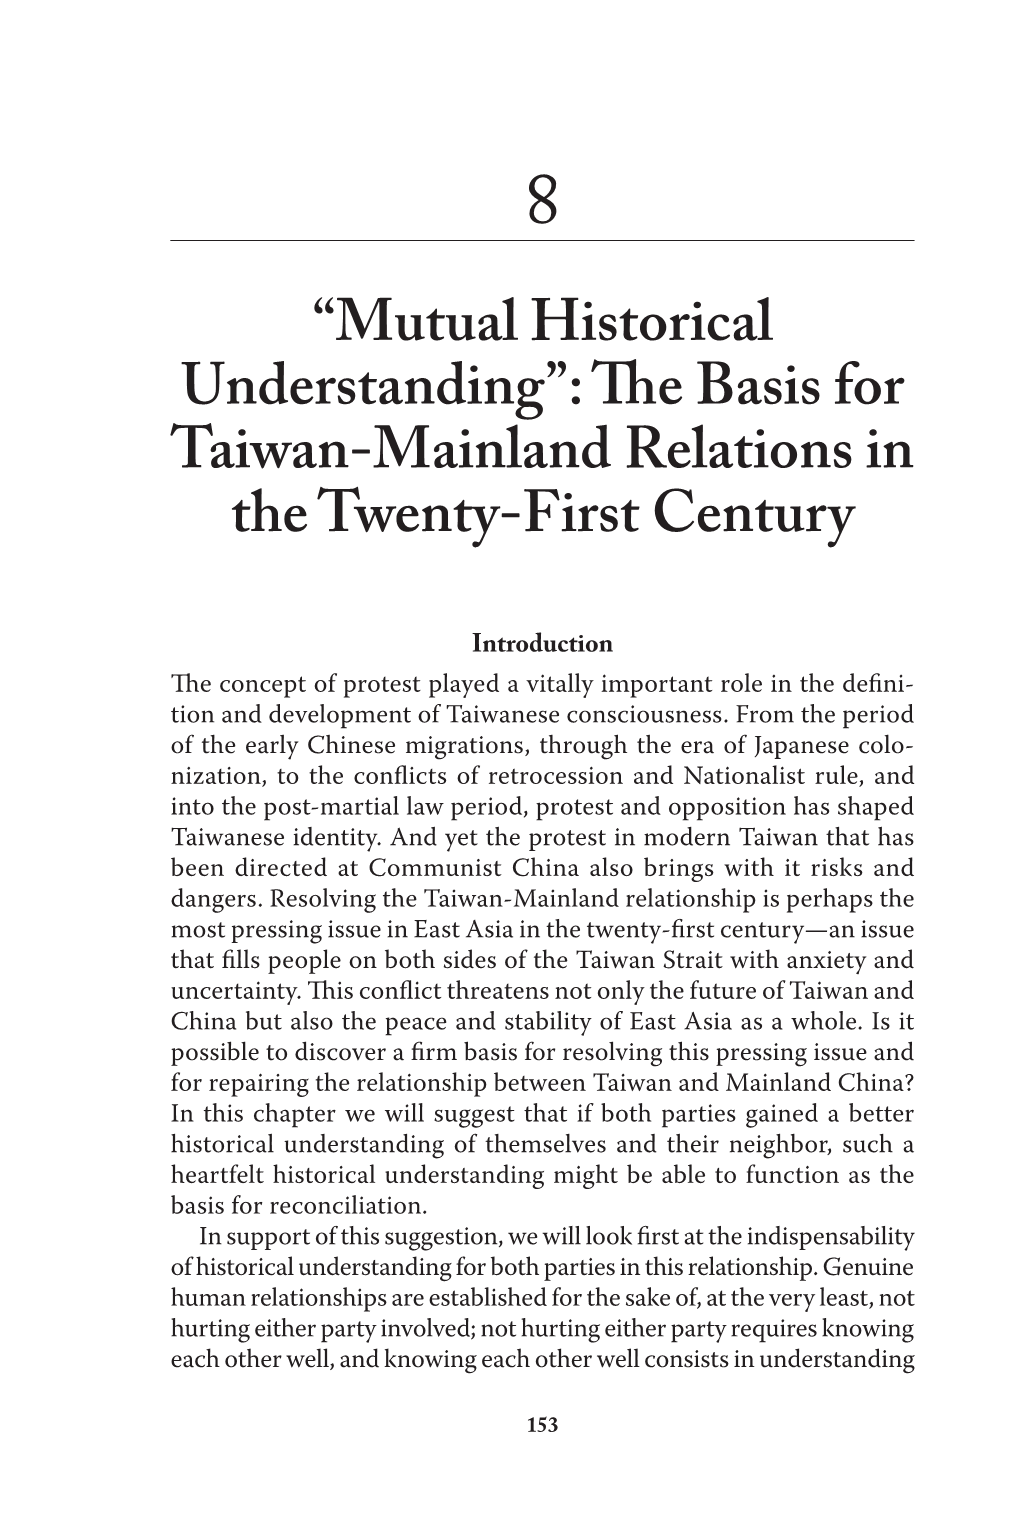 “Mutual Historical Understanding”: the Basis for Taiwan-Mainland